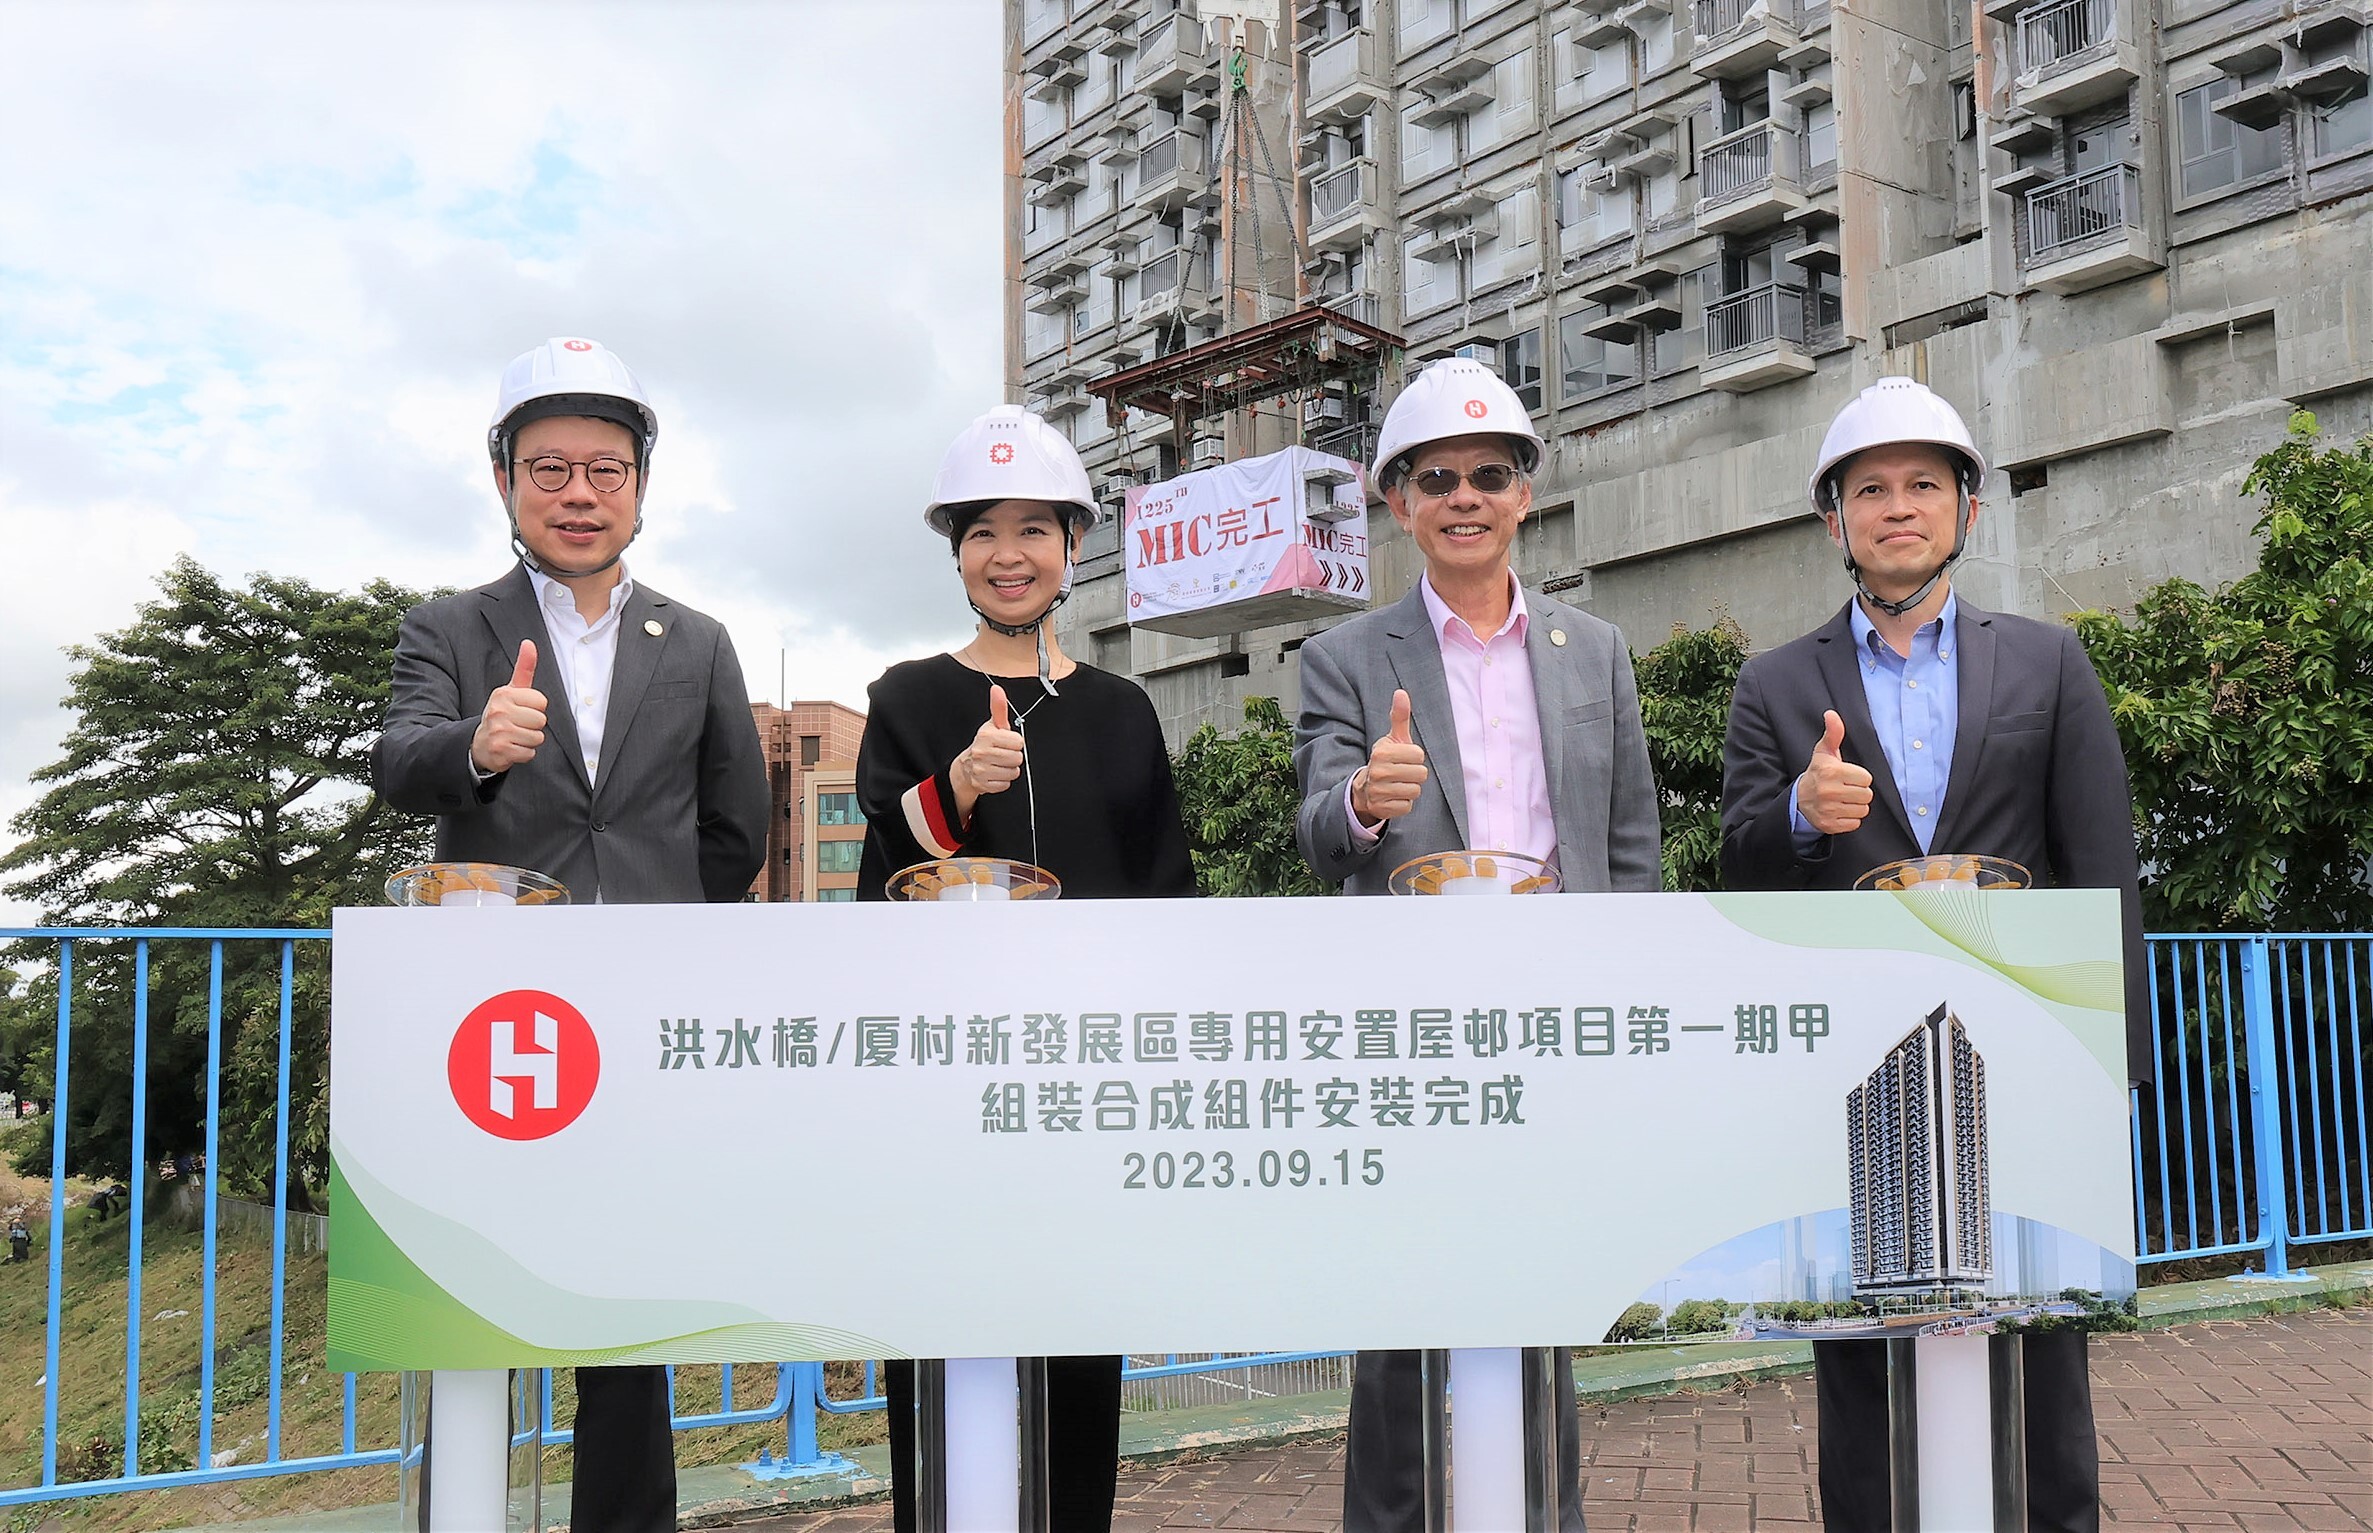 Secretary for Housing Winnie Ho (second from left), Principal Assistant Secretary of the Development Bureau Frankie Fung (first from right), HKHS Chairman Walter Chan (second from right), HKHS Chief Executive Officer James Chan (first from left) kickstarted the installation of the last MiC module at the project. 